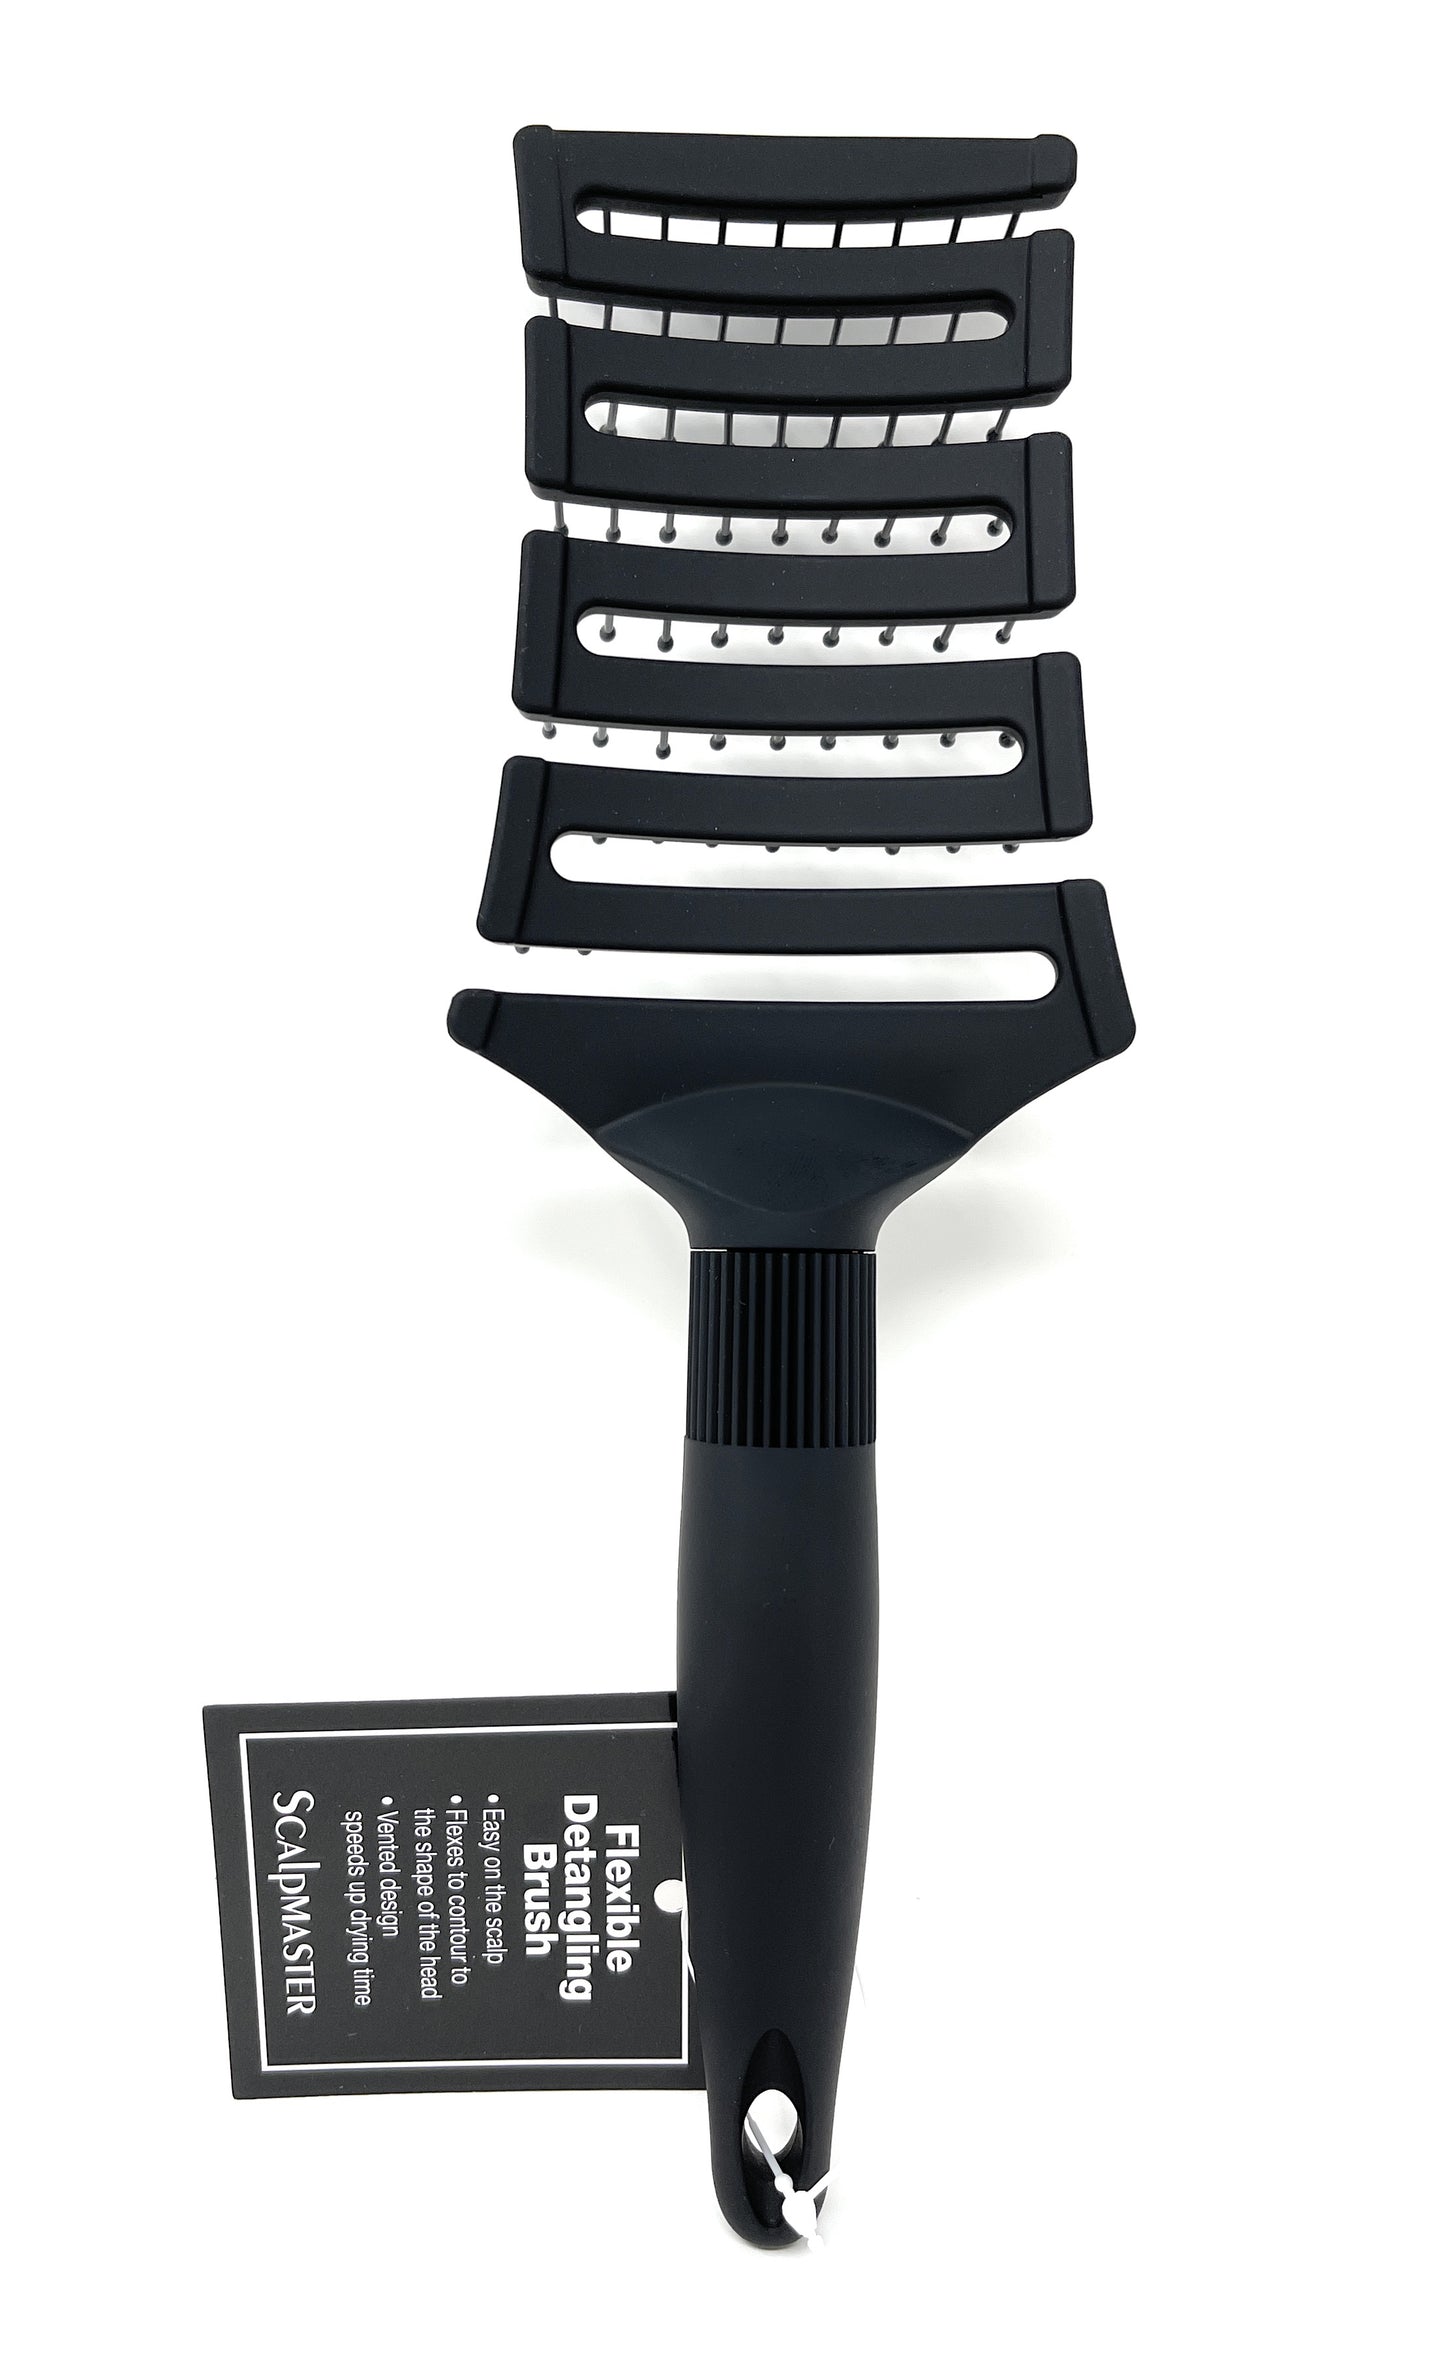 Sclapmaster Hair Brush Ball-tipped Bristles Flexible Vented For Hair Drying Detangling Hair Styling Soft Rubberized Handle. Black 1 Pc.